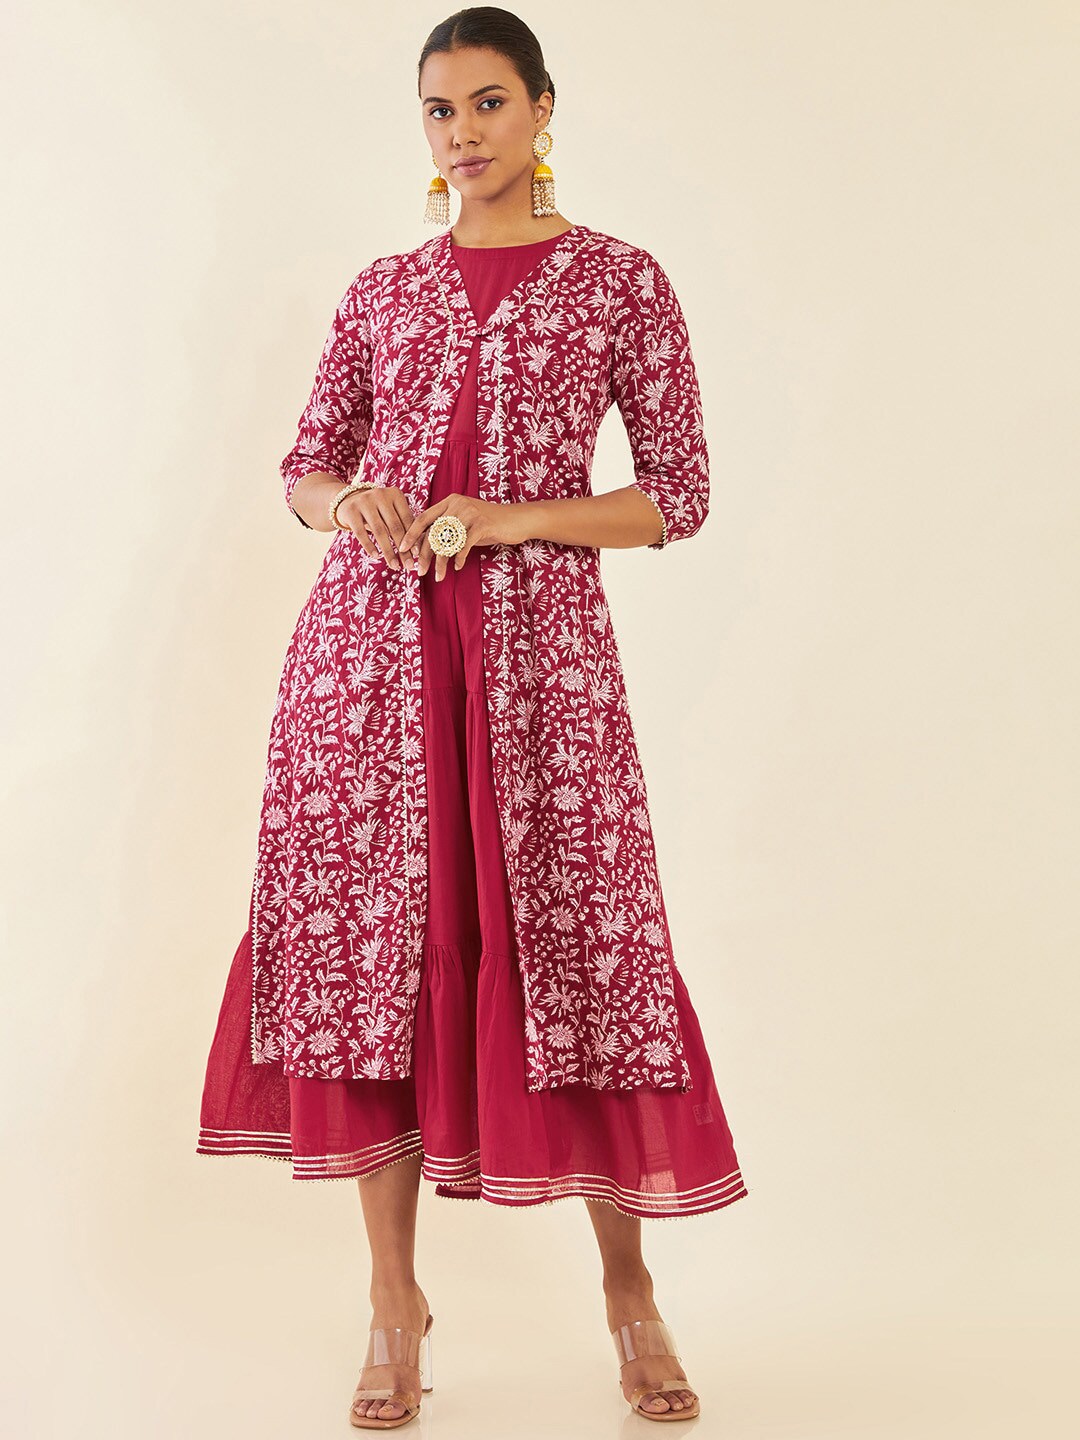 Soch Red Ethnic Motifs Printed Cotton A-Line Midi Dress Price in India